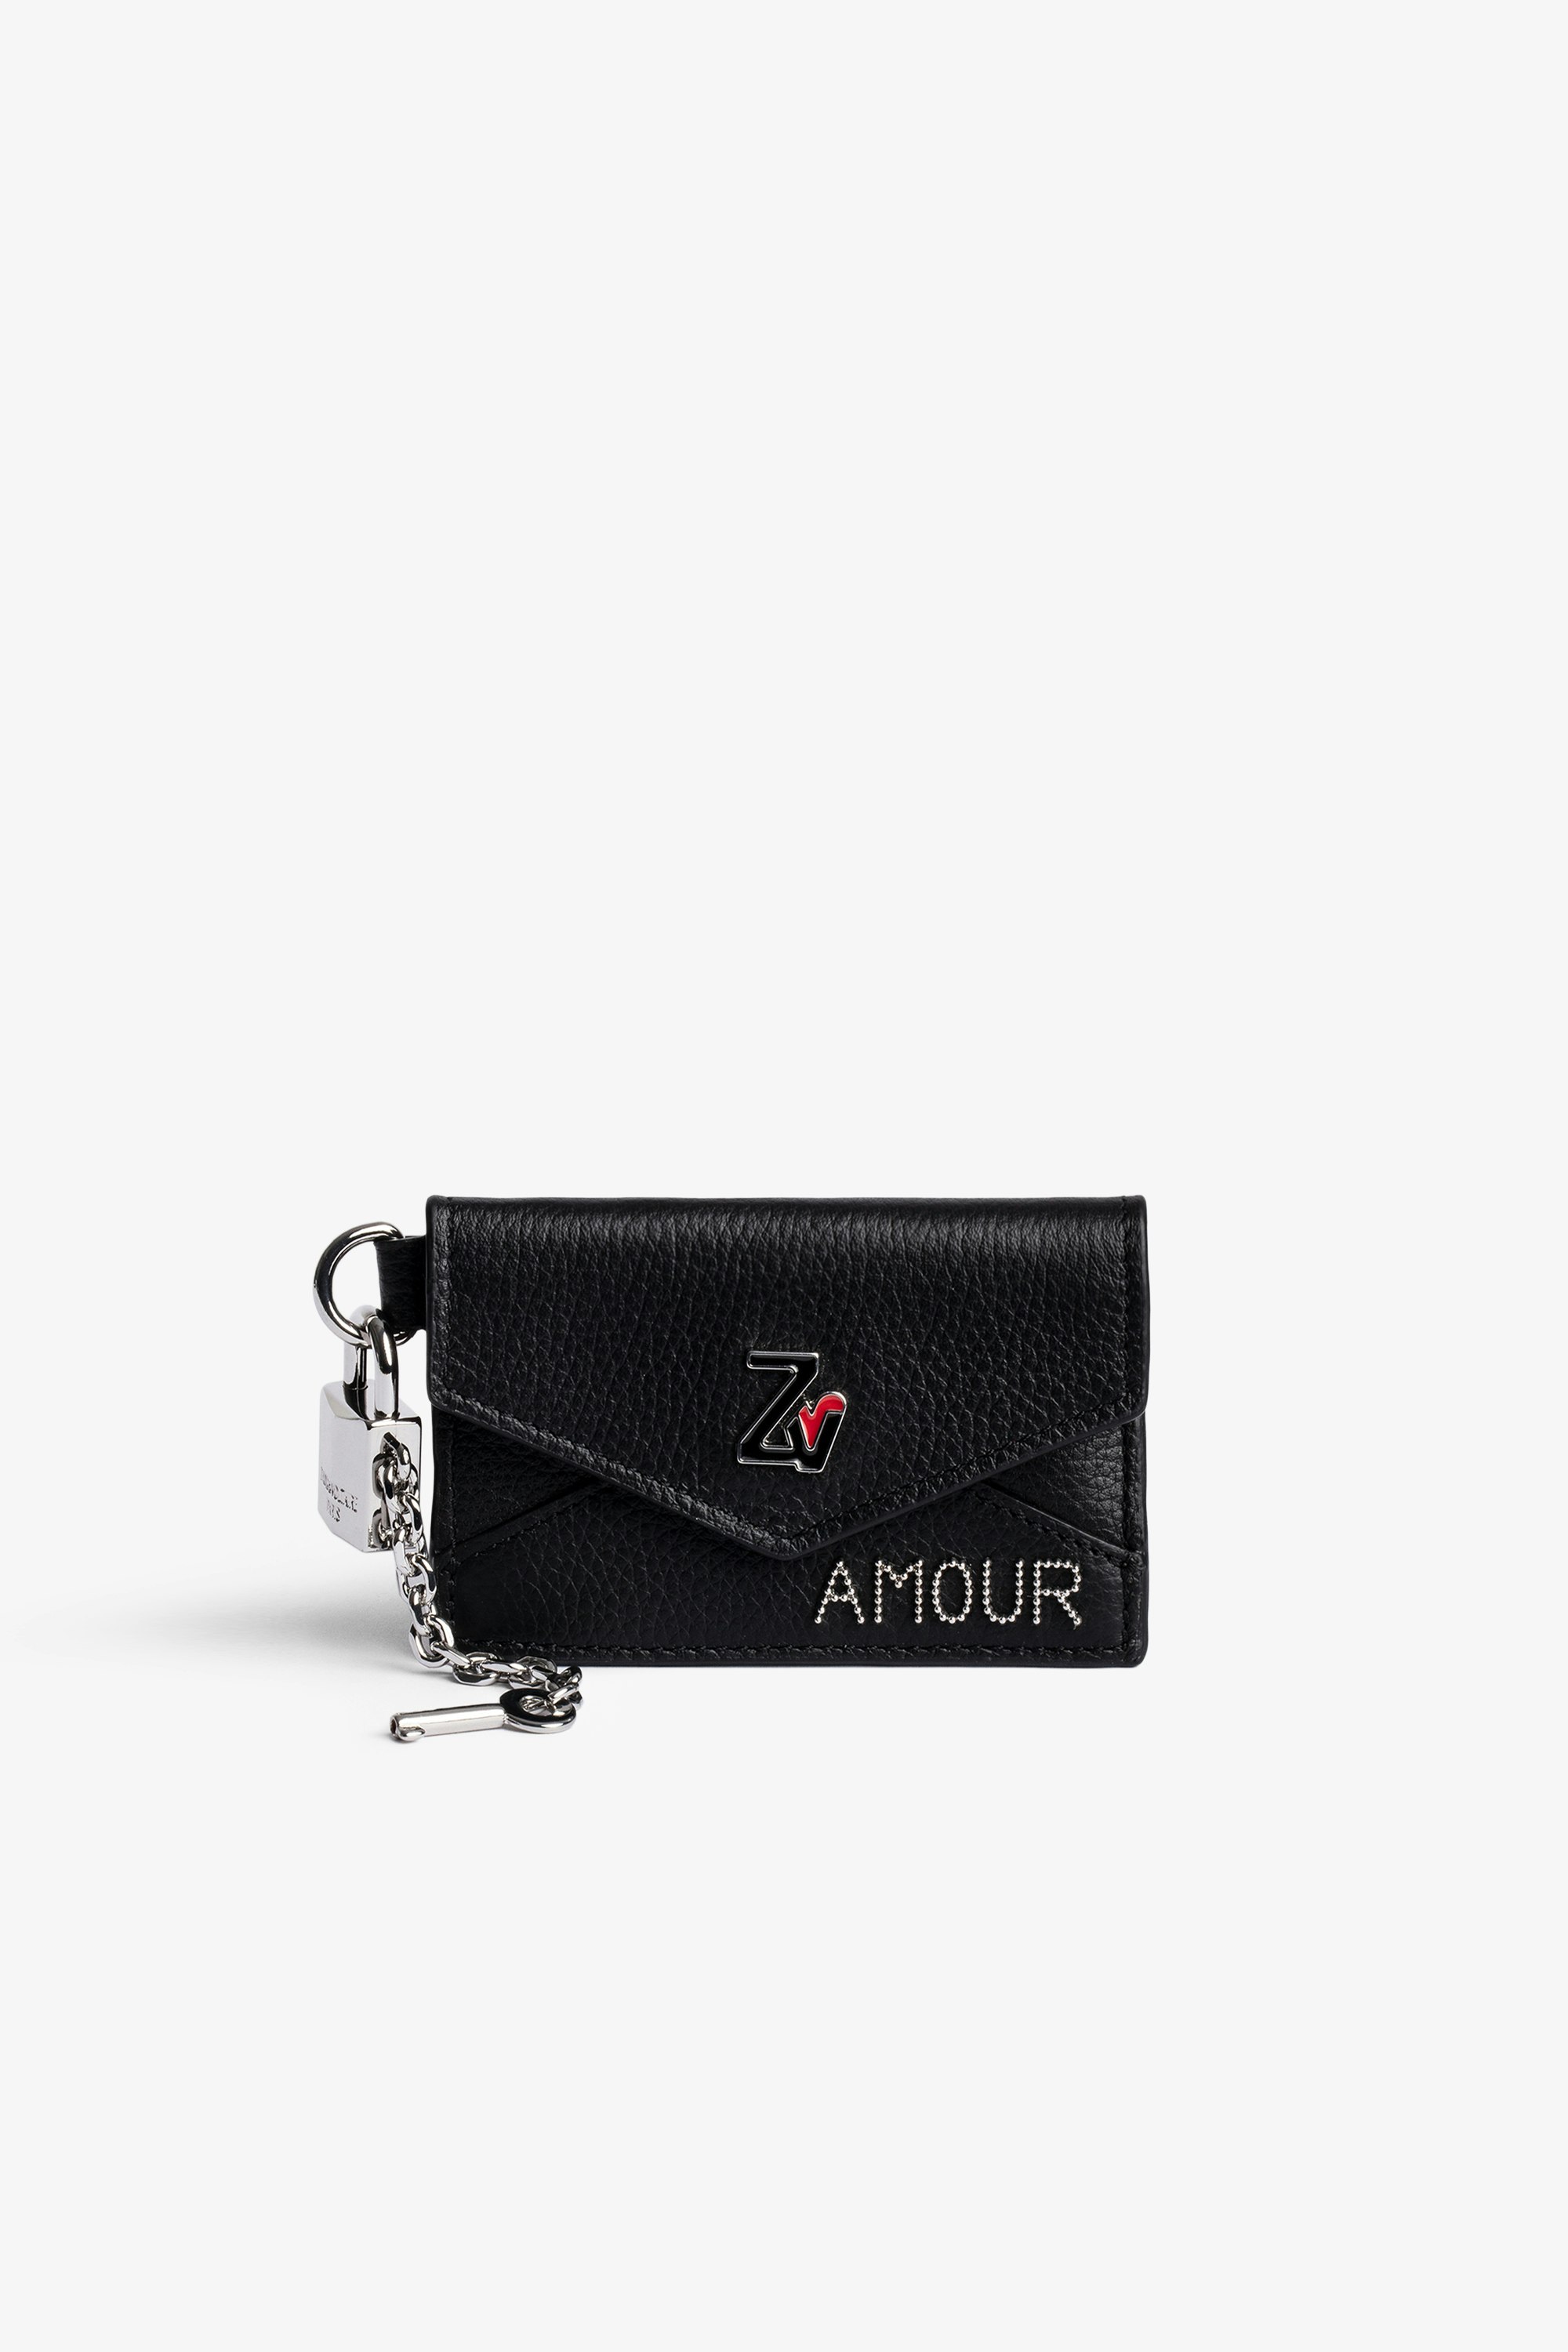 ZV Crush Pass レザー財布 Women's small card holder in black grained leather